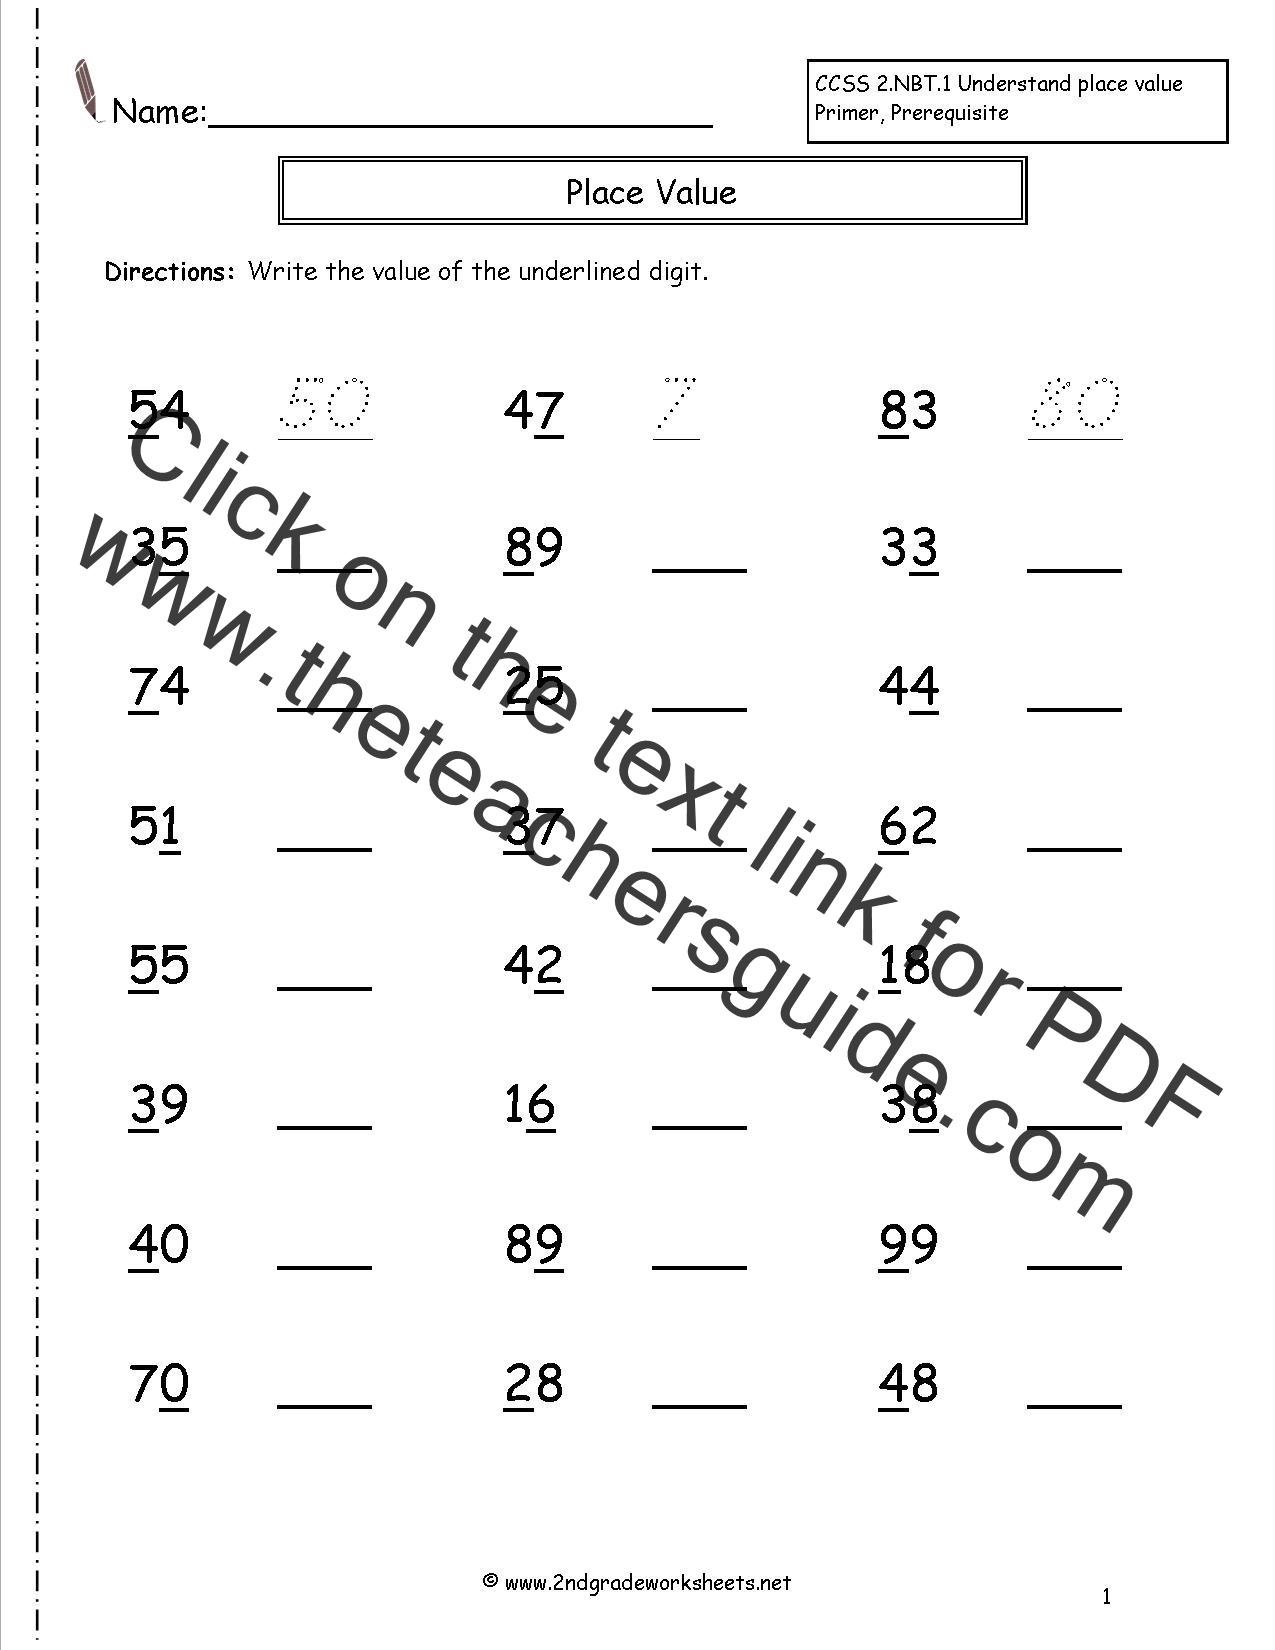 place-value-chart-printables-printable-blank-world